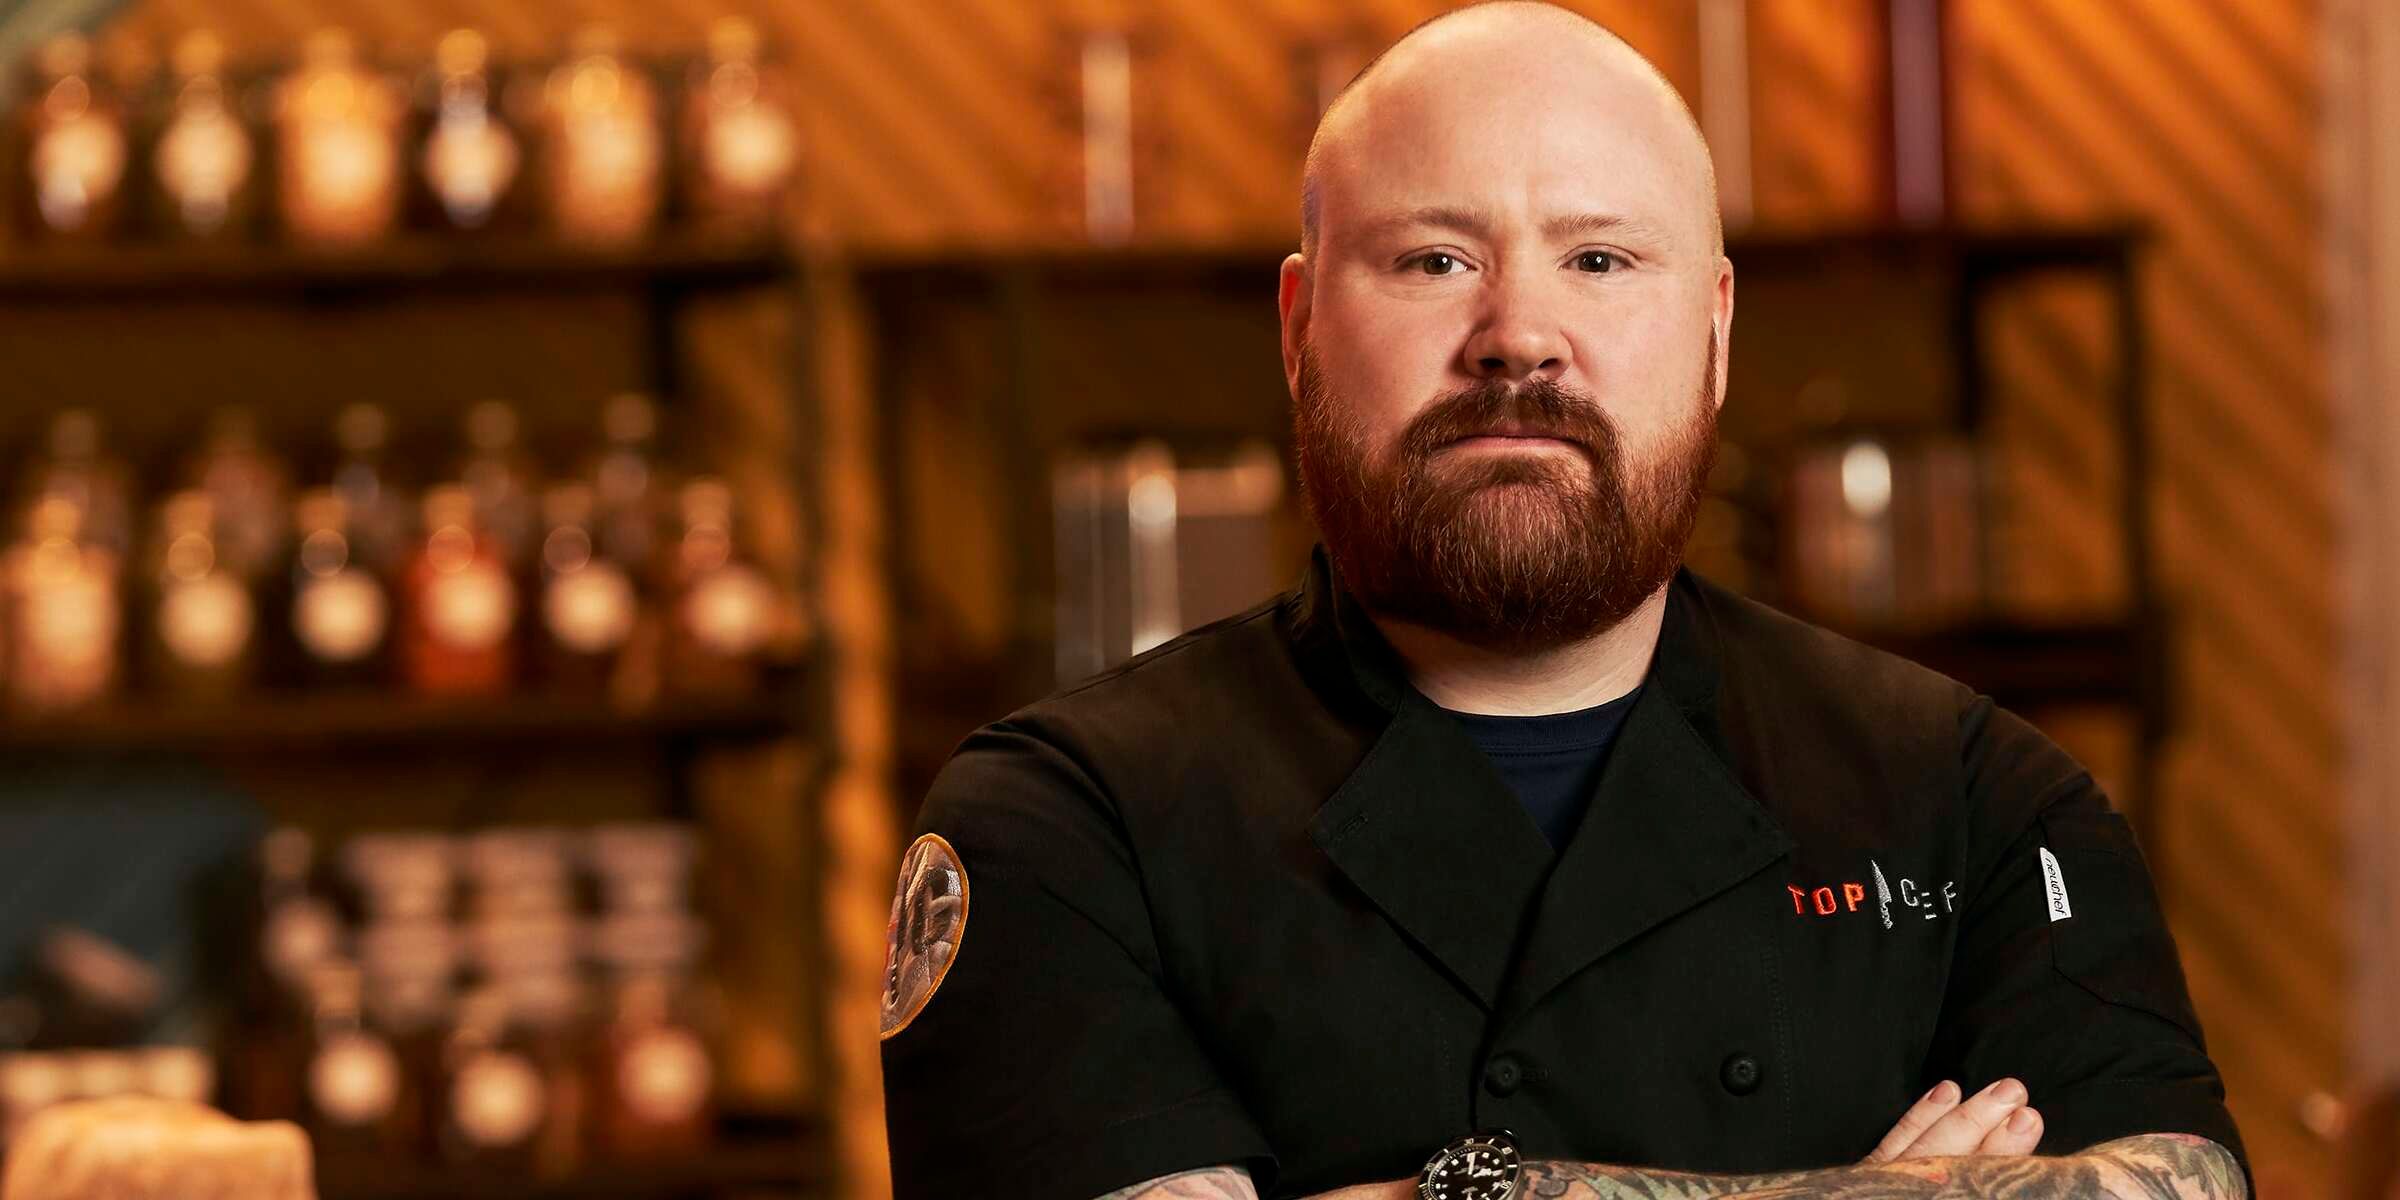 Kevin in Top chef duels